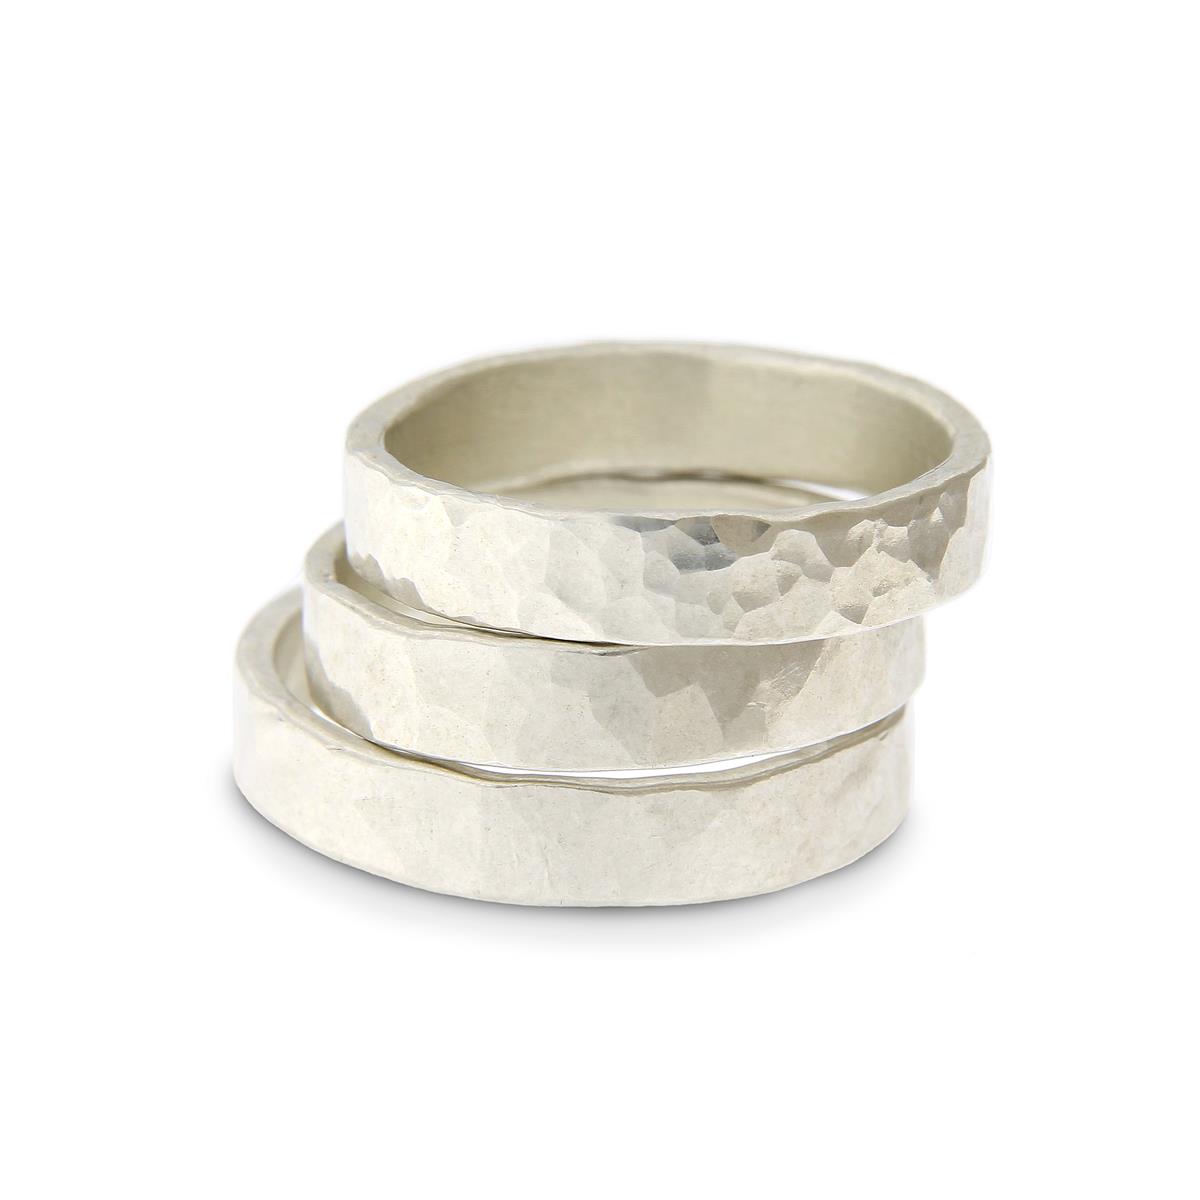 Katie g. Jewellery_Wide hammered Rings 4,5mm - Silver